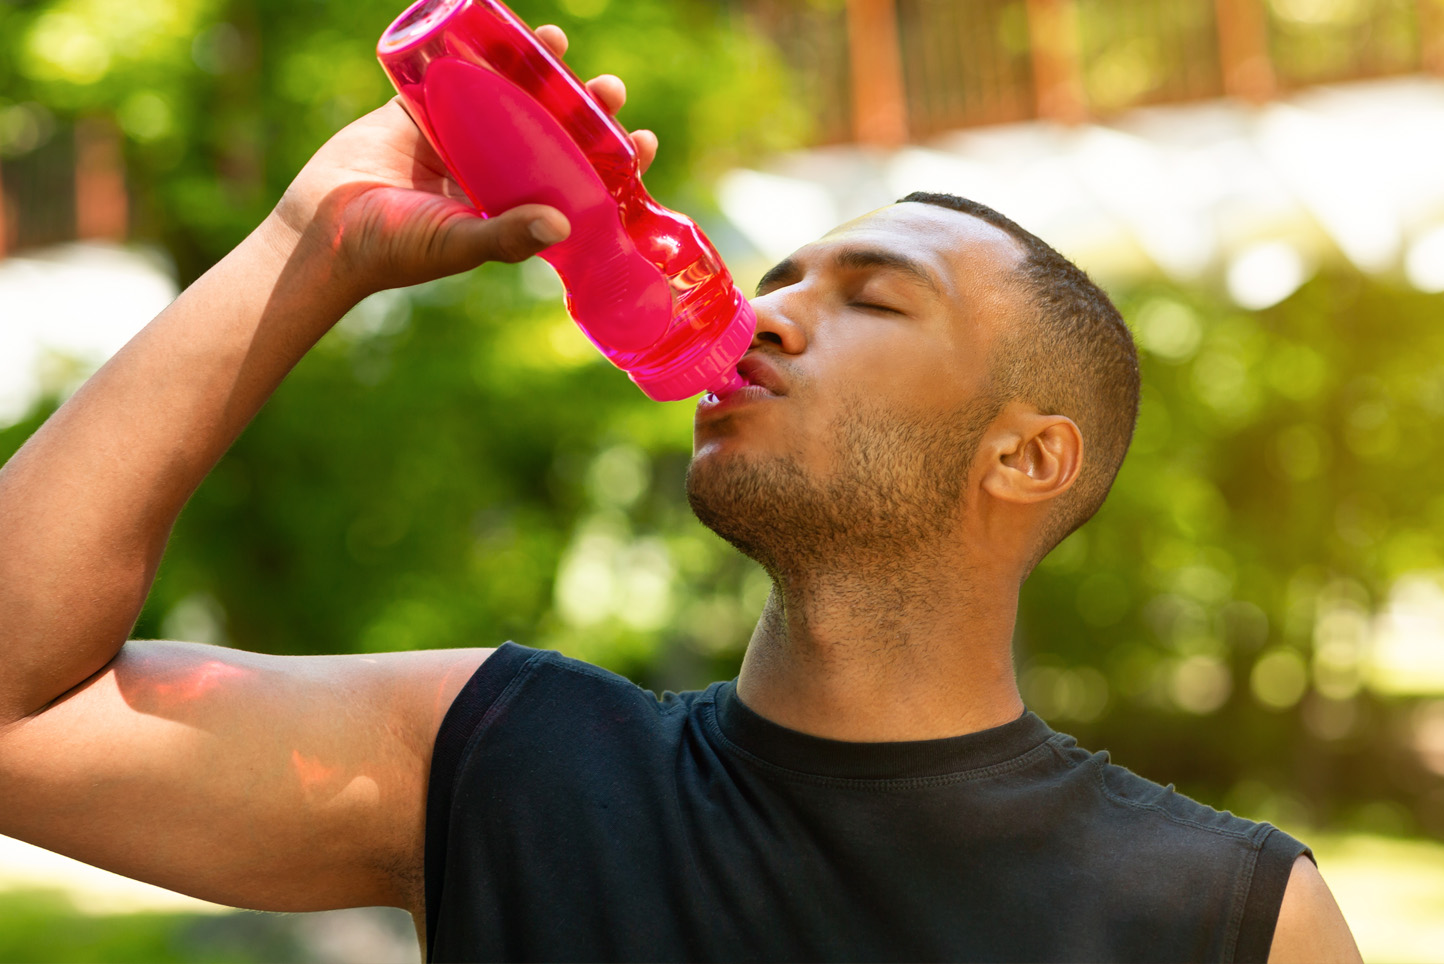 Athlete drinking out of water bottle after outdoor exercise